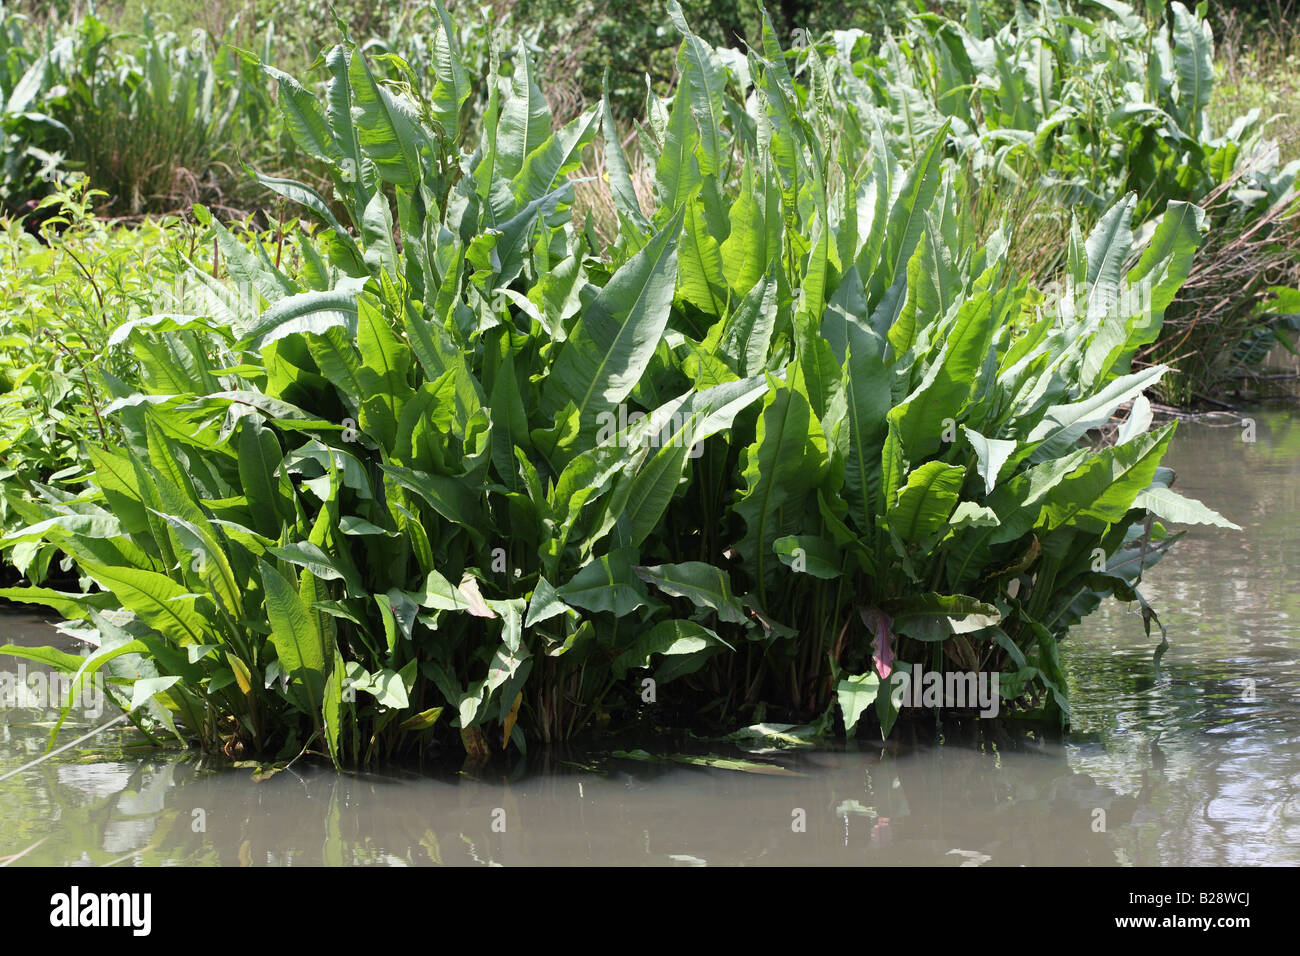 GREAT WATER DOCK Rumex hydrolapathum PLANT GROWING AT WATERS EDGE Stock Photo